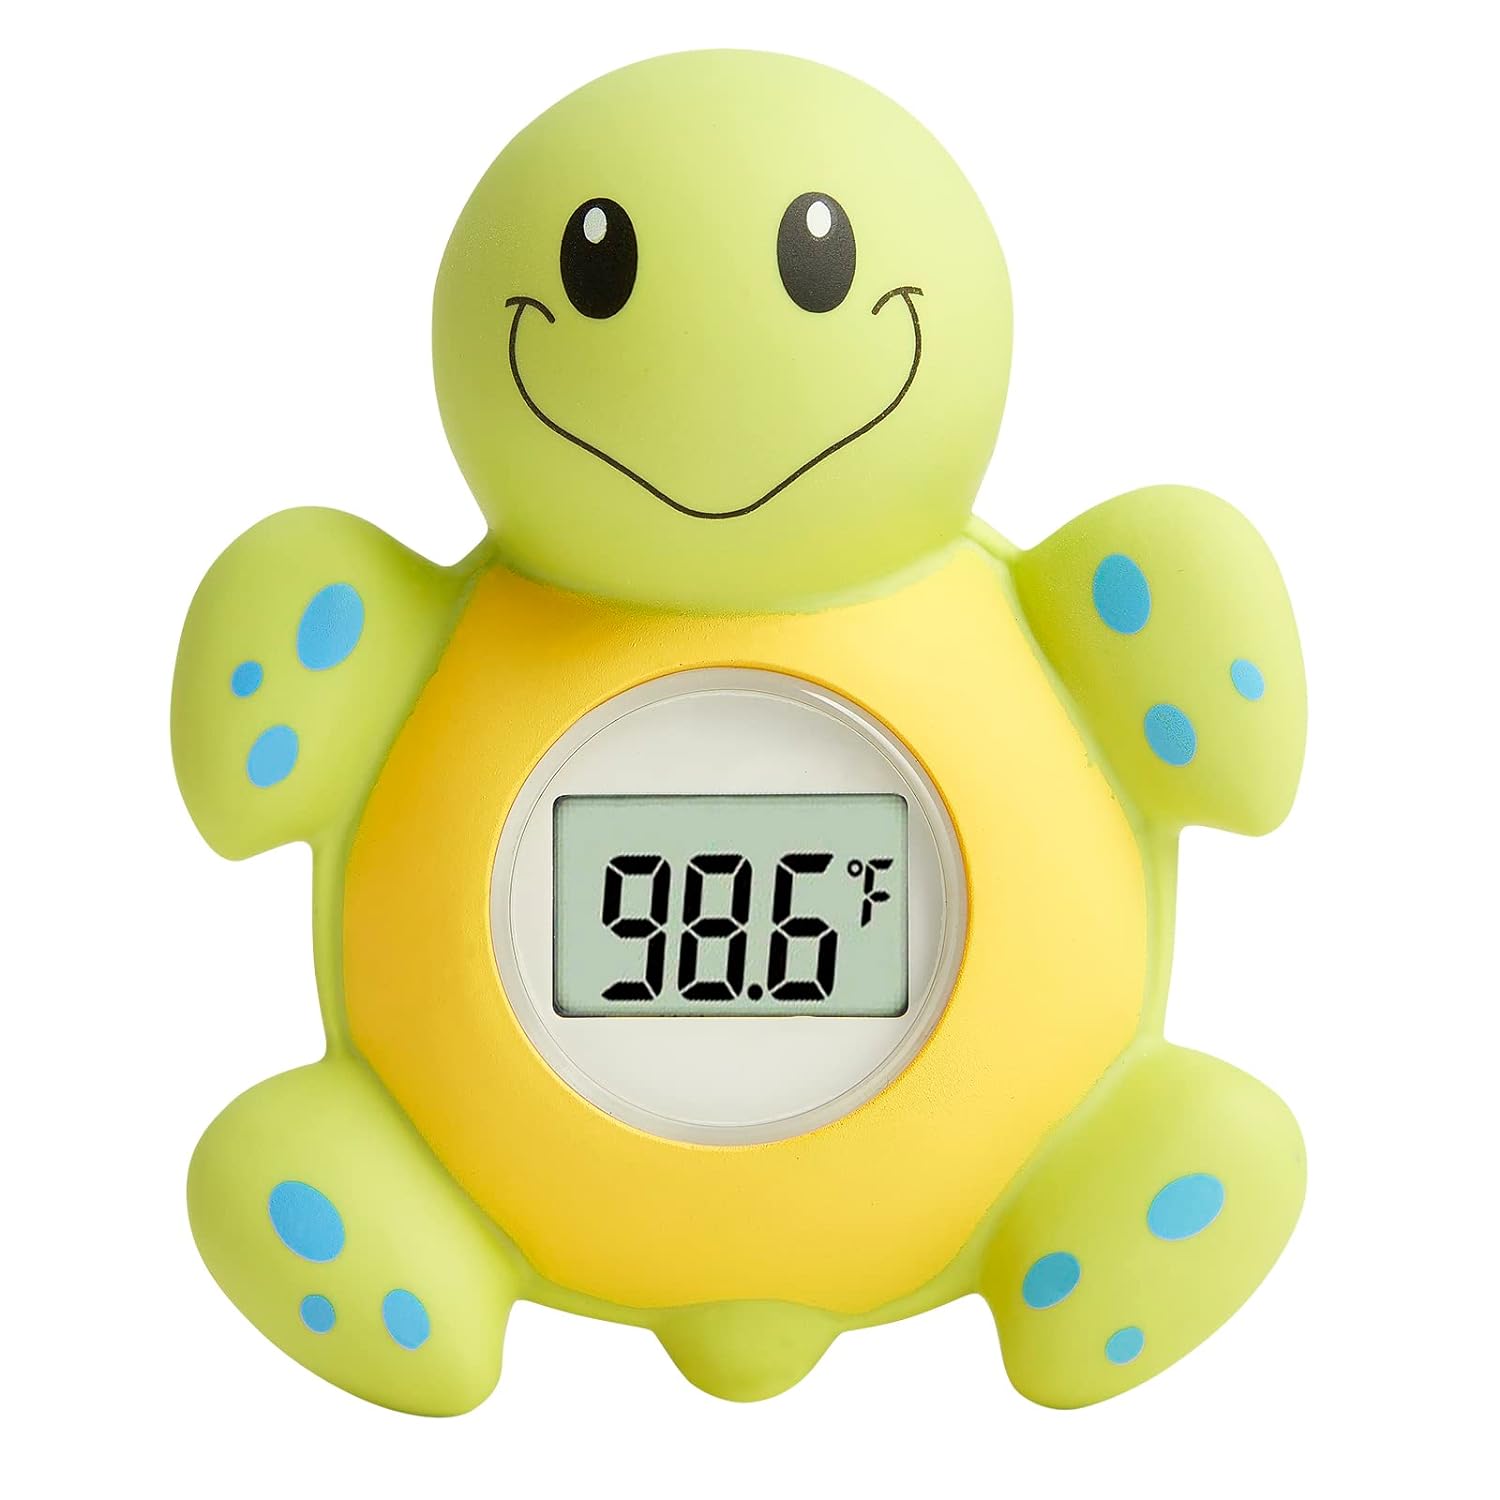 Baby Bath Thermometer (Upgraded Version) with Automatic Water Induction Switch, Baby Bath Float and Play Toy for Infant, Smart Accurate Bathroom Safety Temperature Thermometer ?/?